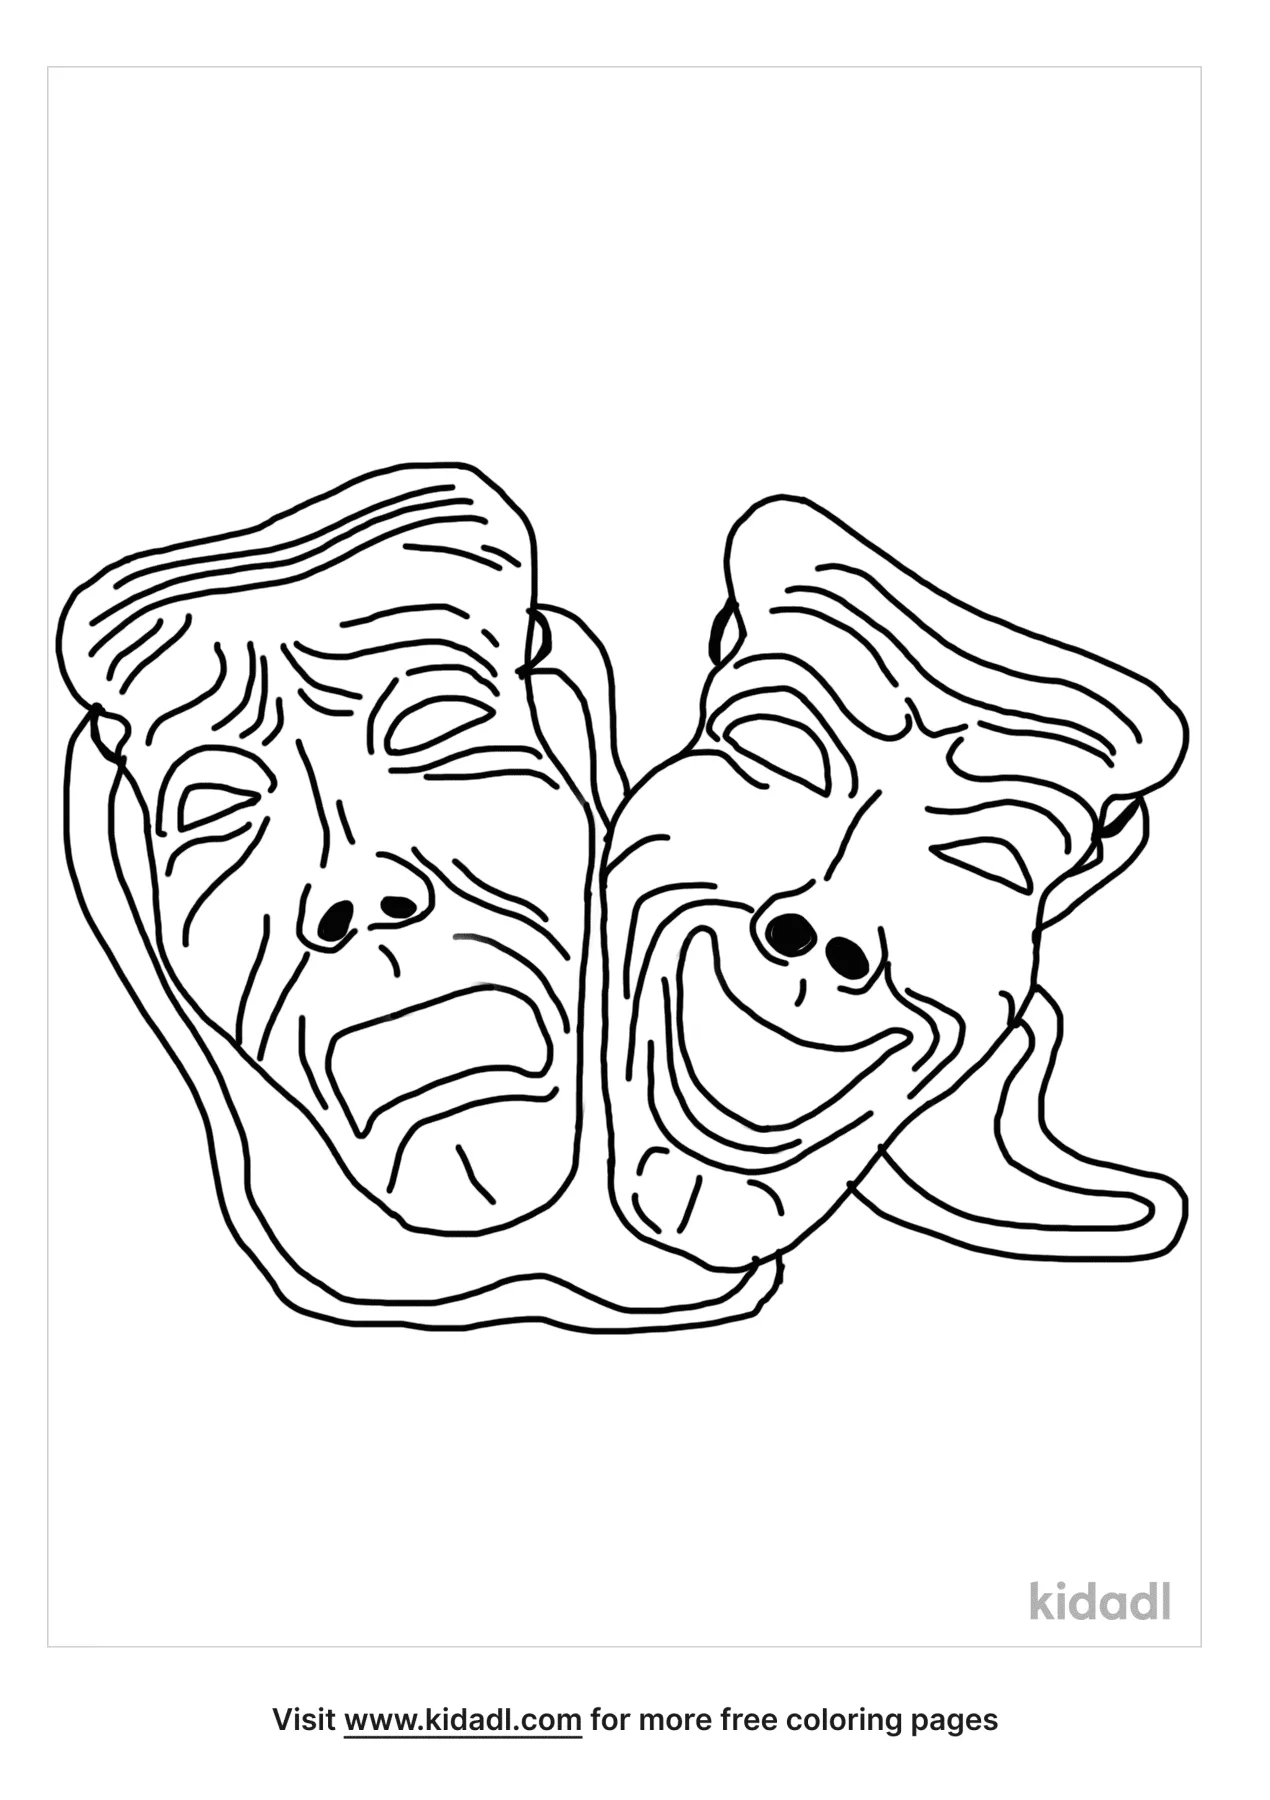 Tragedy Mask Coloring Page